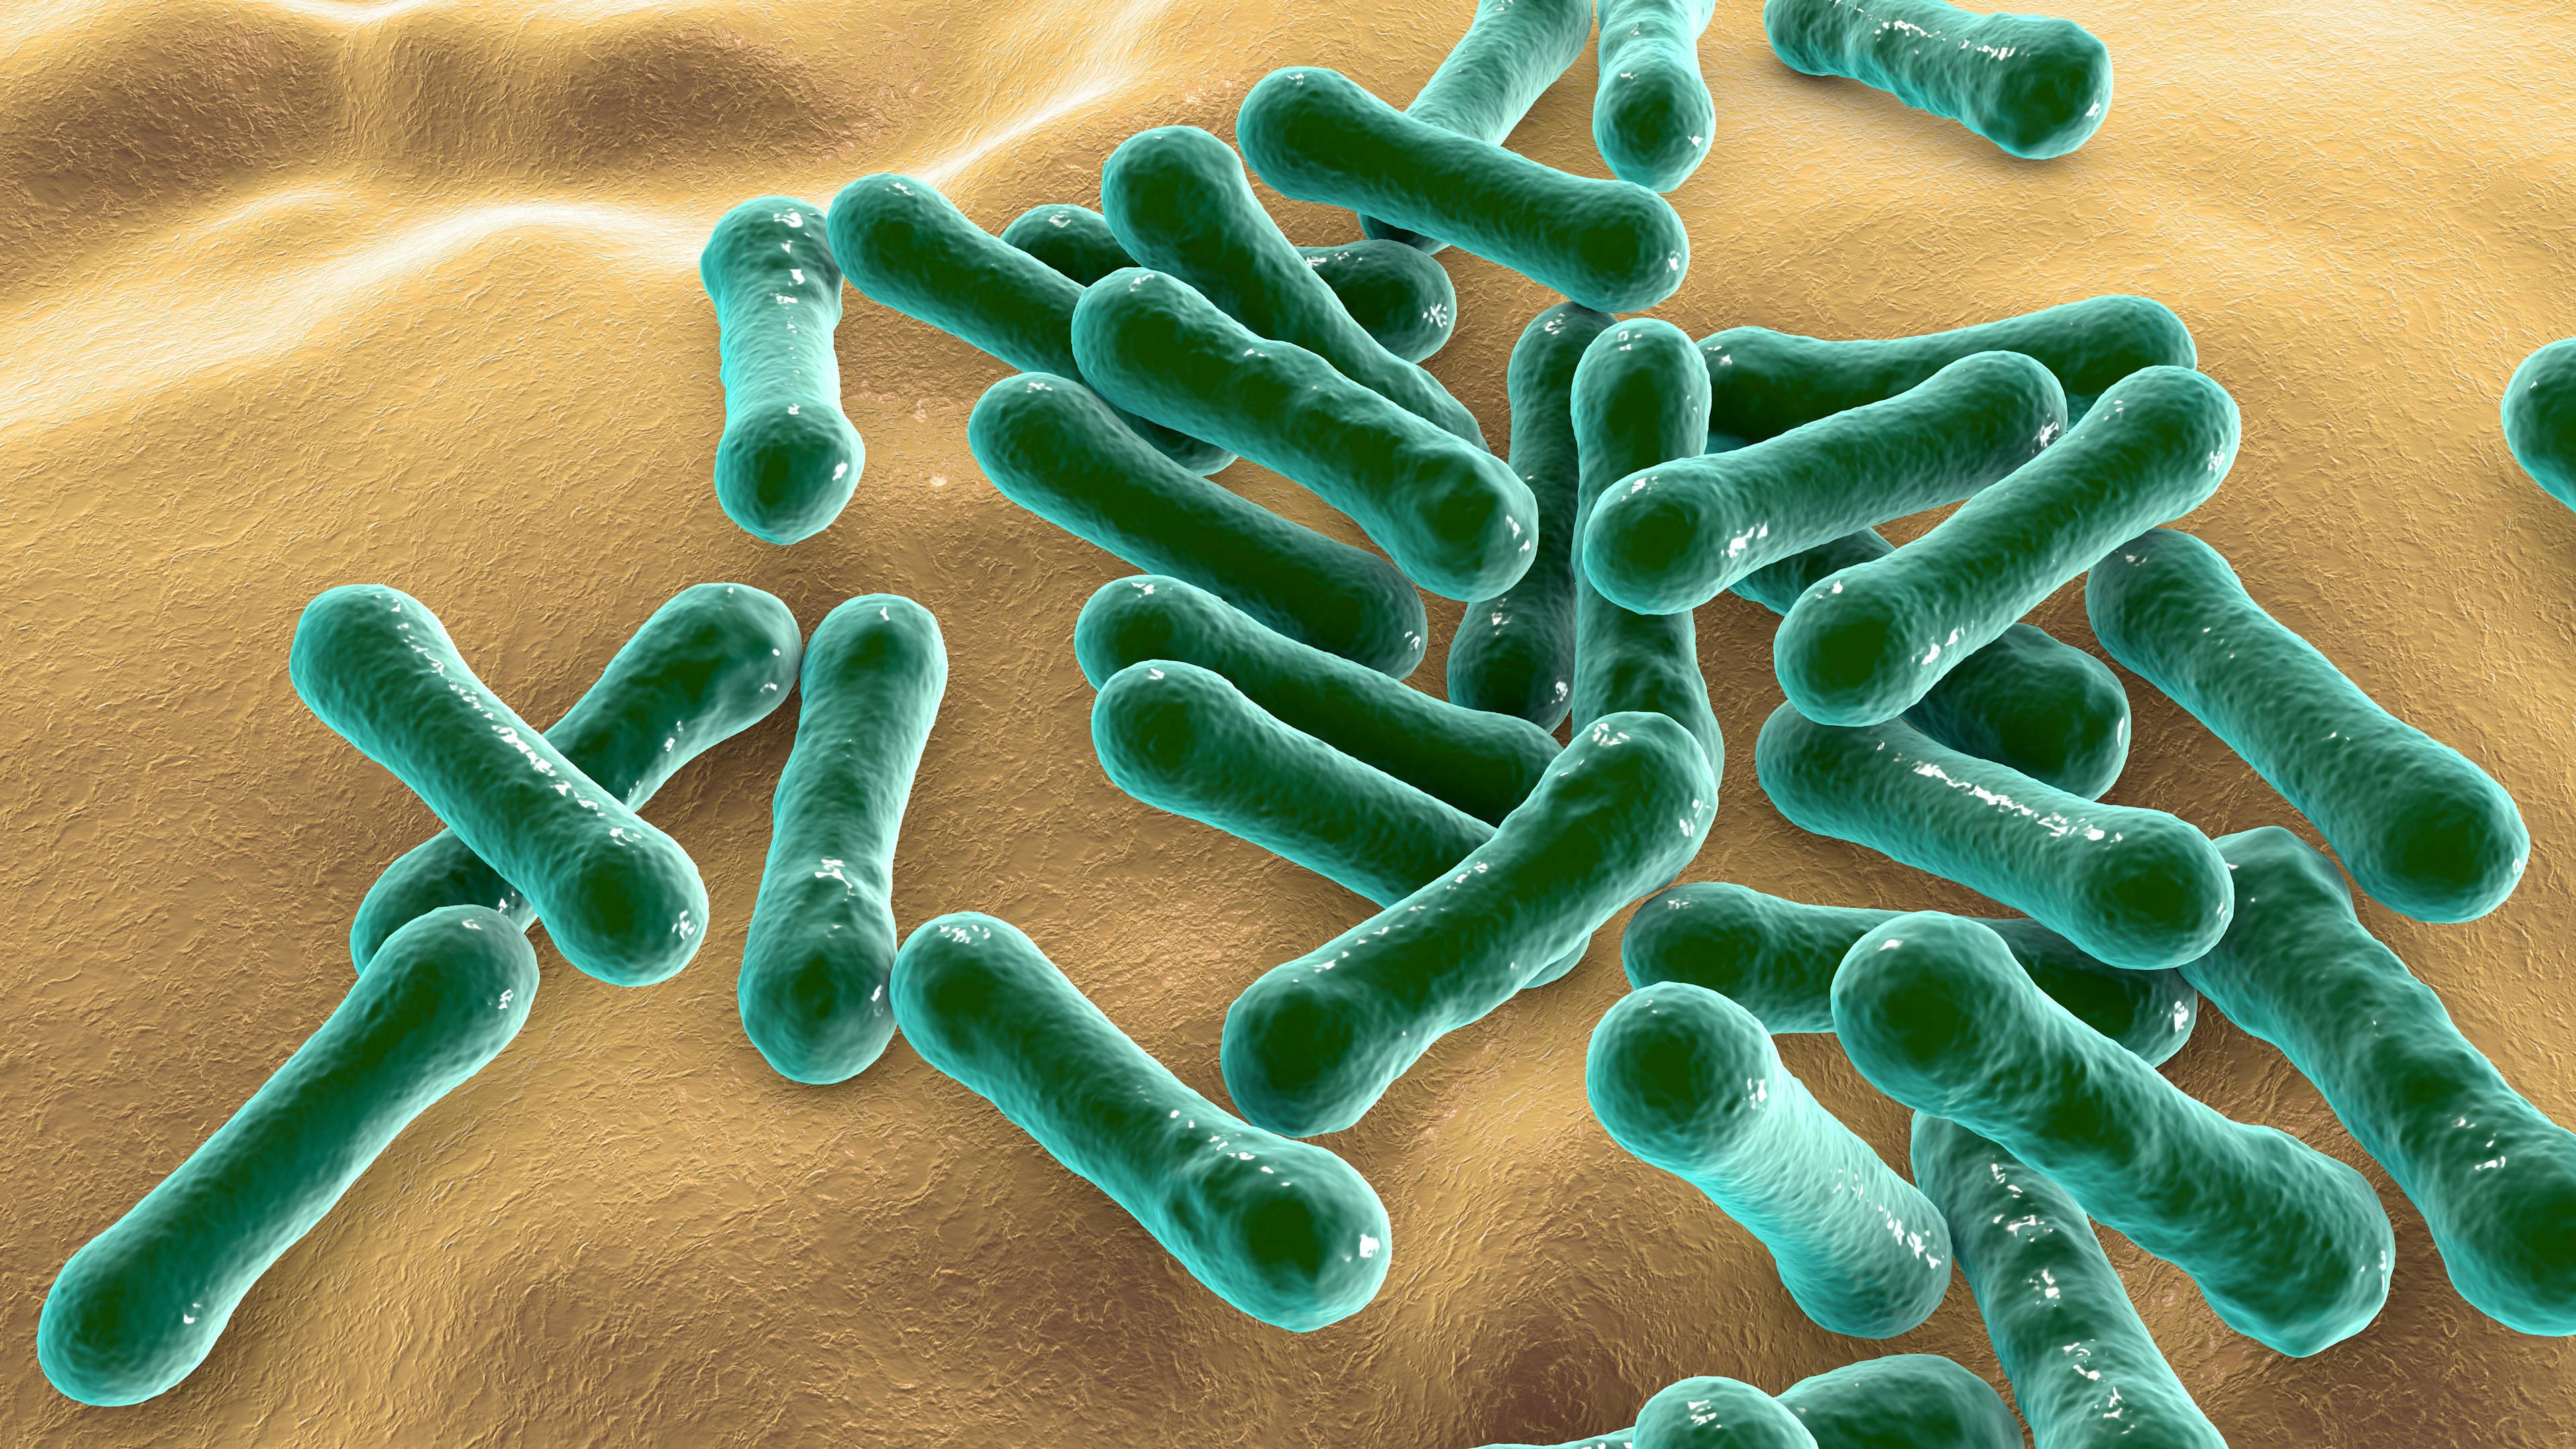 New Findings on C Difficile Physiology ‘Flips the Field of Microbiology on its Head,’ According to Investigator